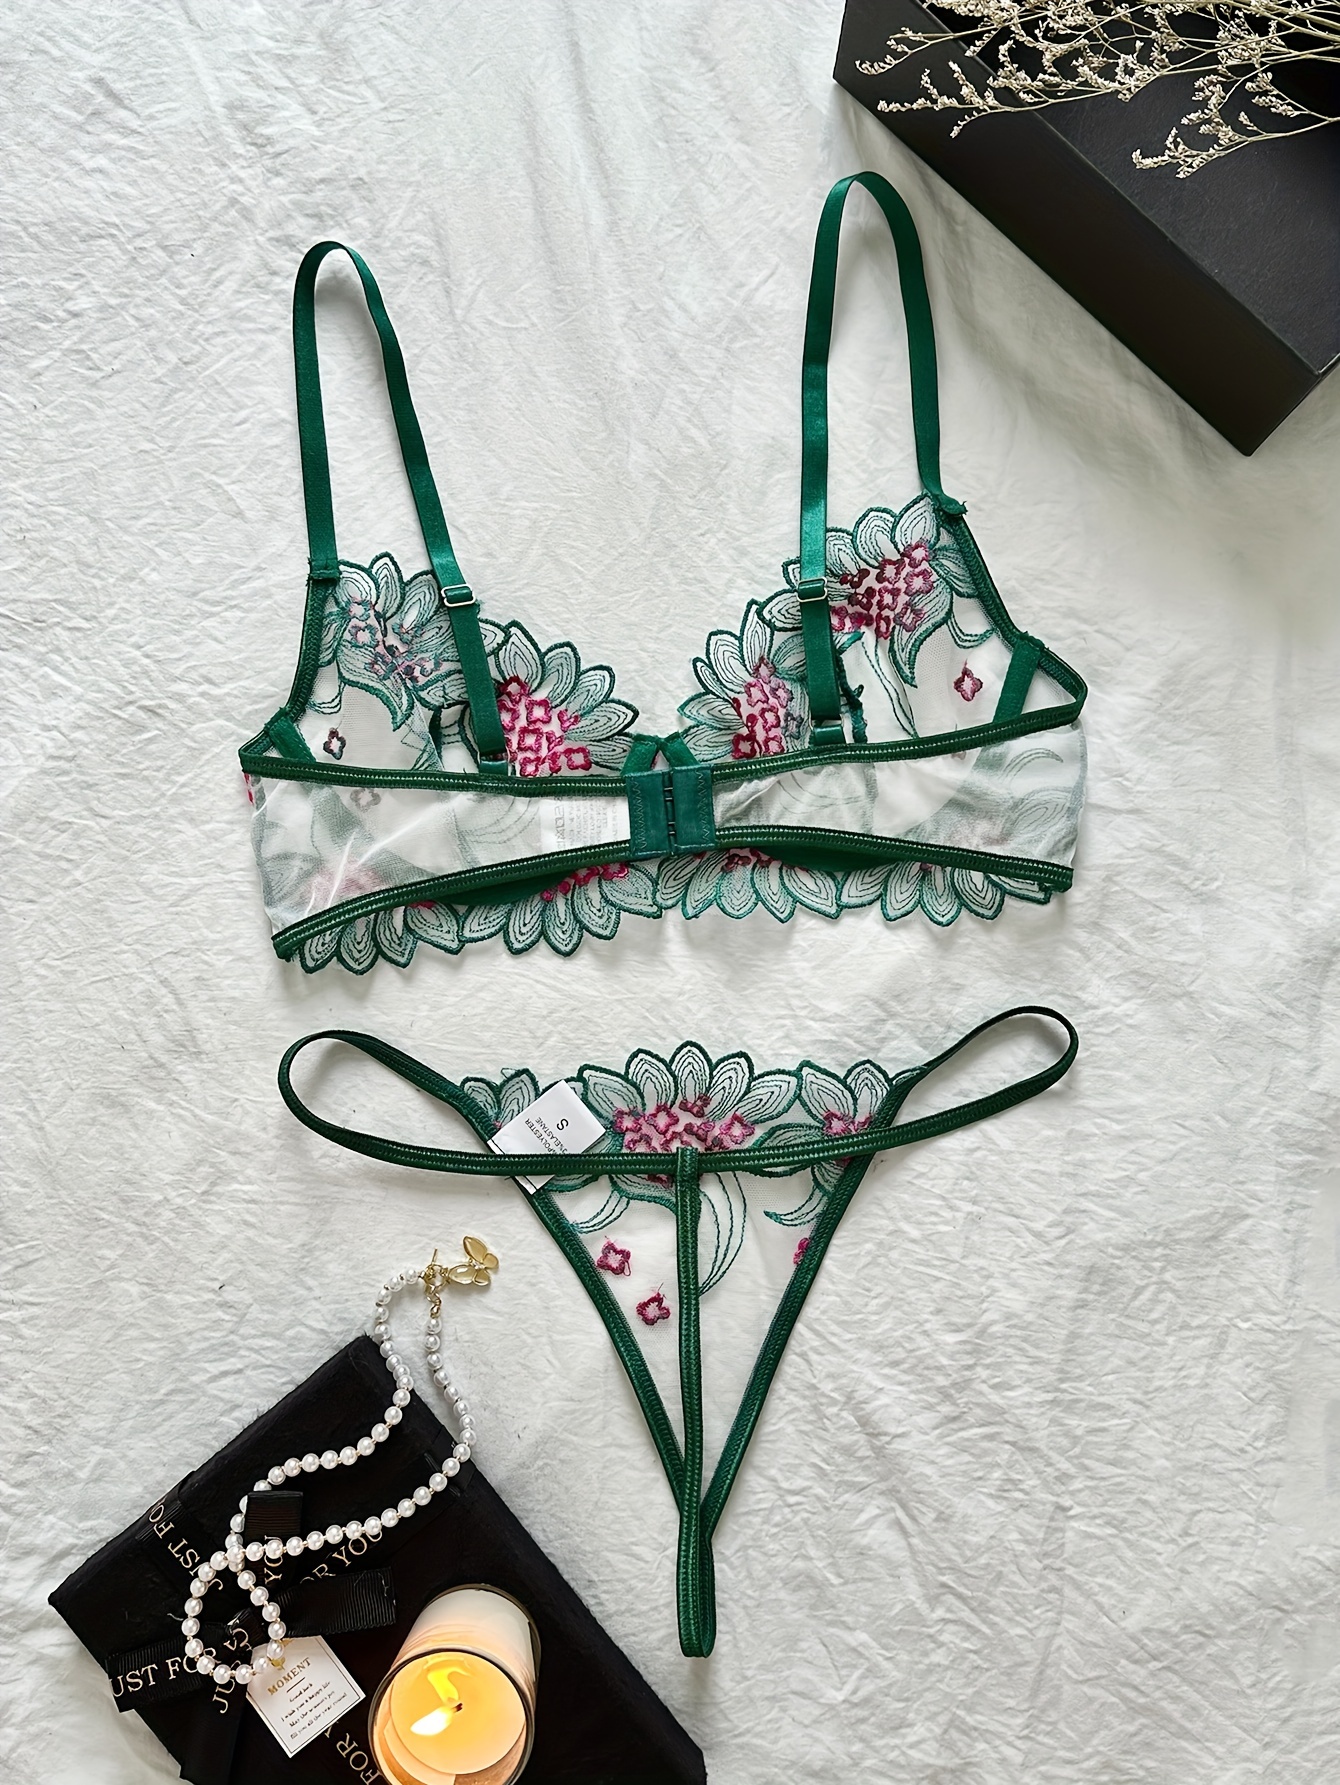 Dark Green Floral Lace Embroidered Push Up Lingerie Set With Sheer